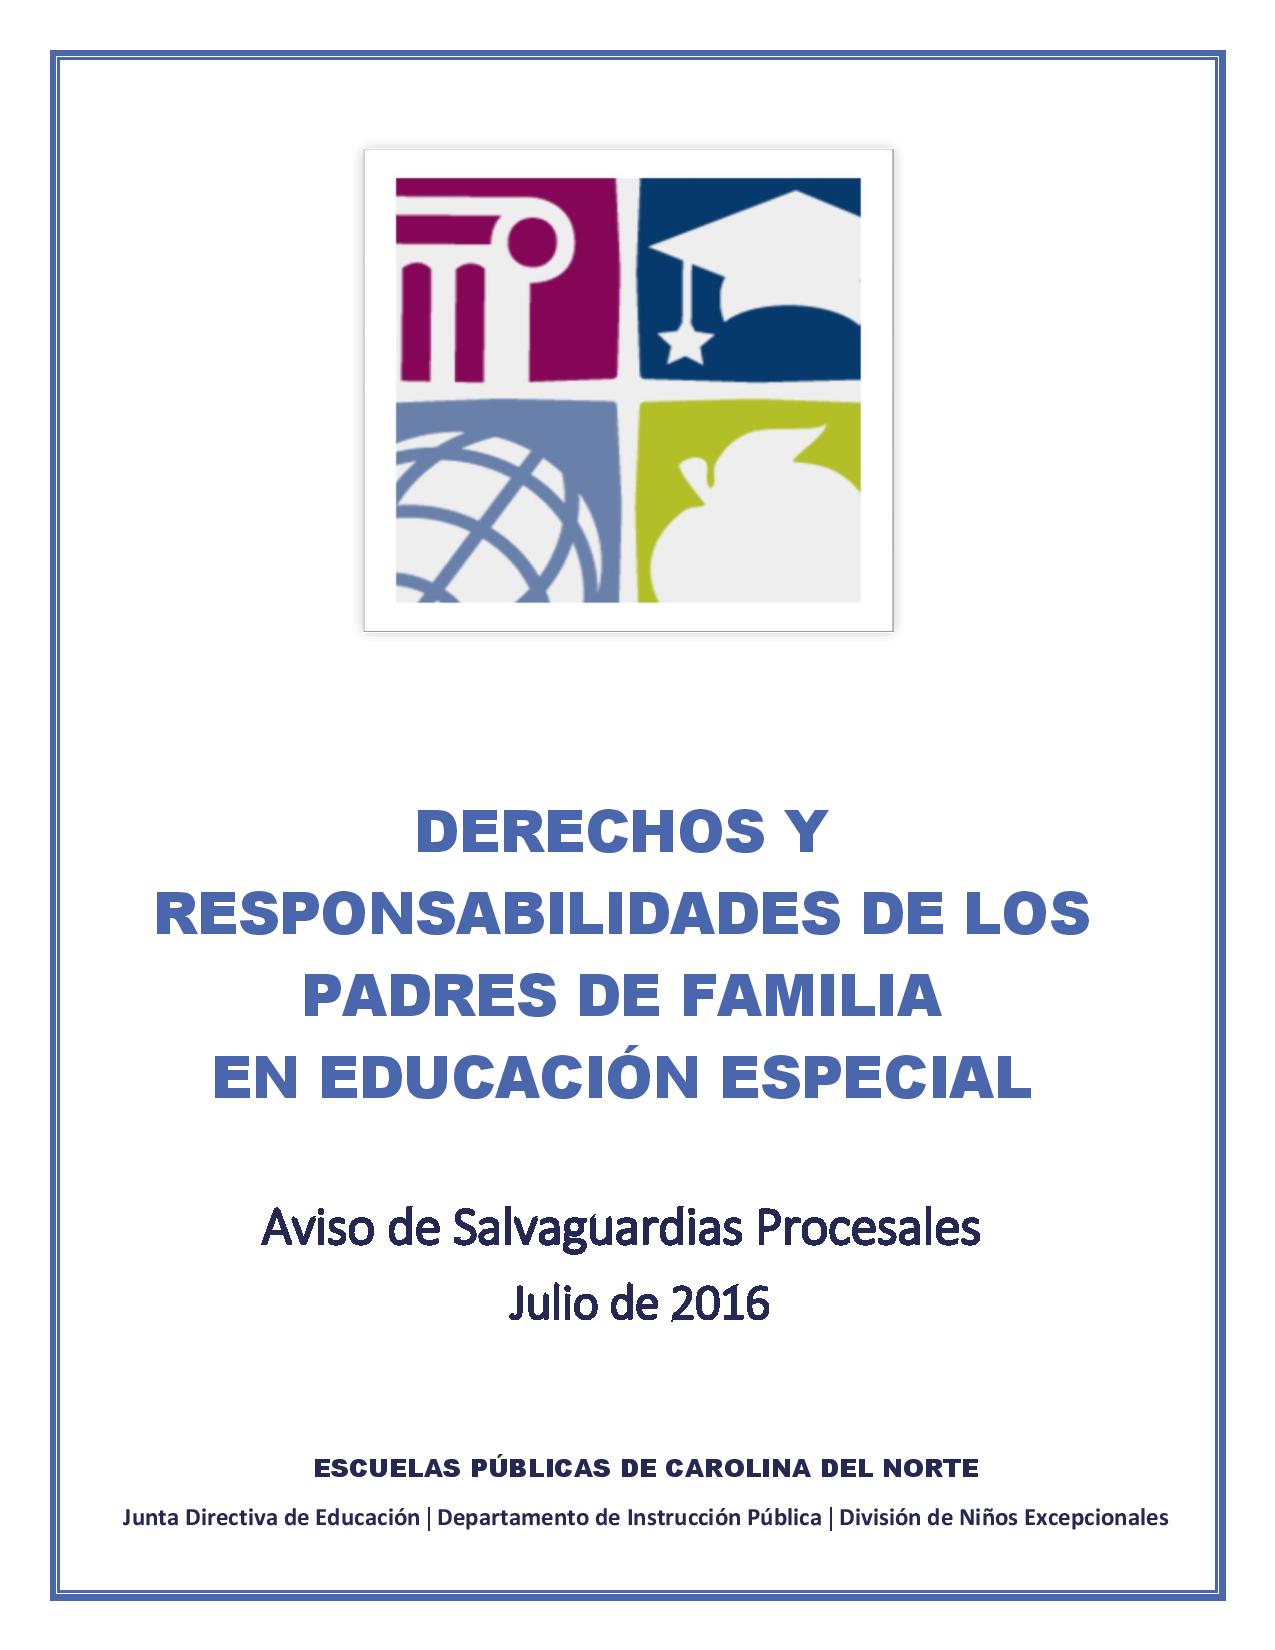 image of parents rights handbook in spanish